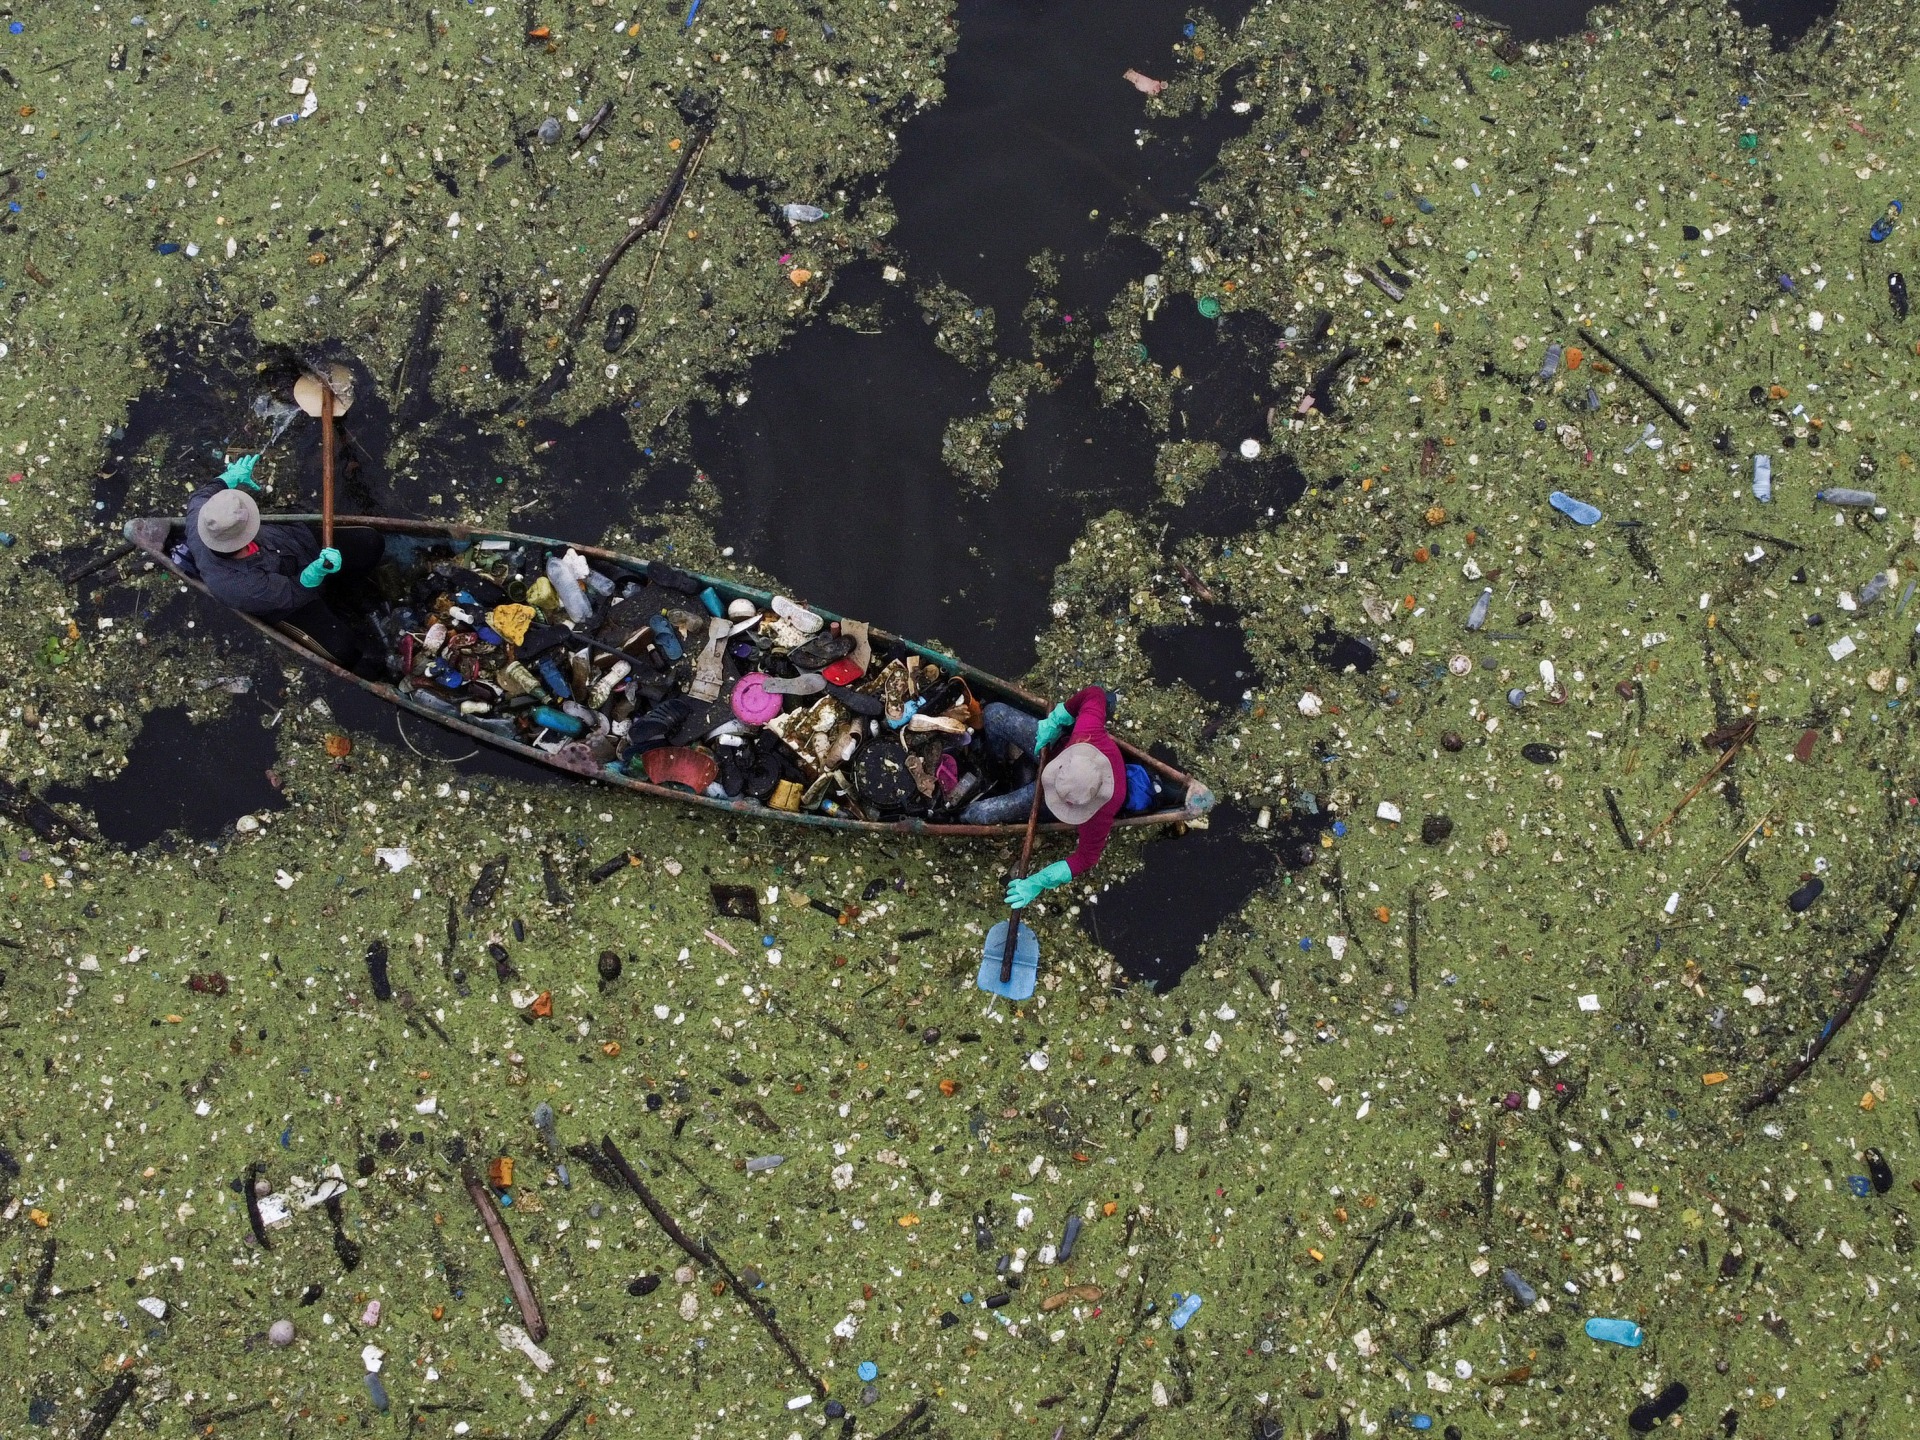 Photos: El Salvador&rsquo;s biggest freshwater lake swamped by rubbish